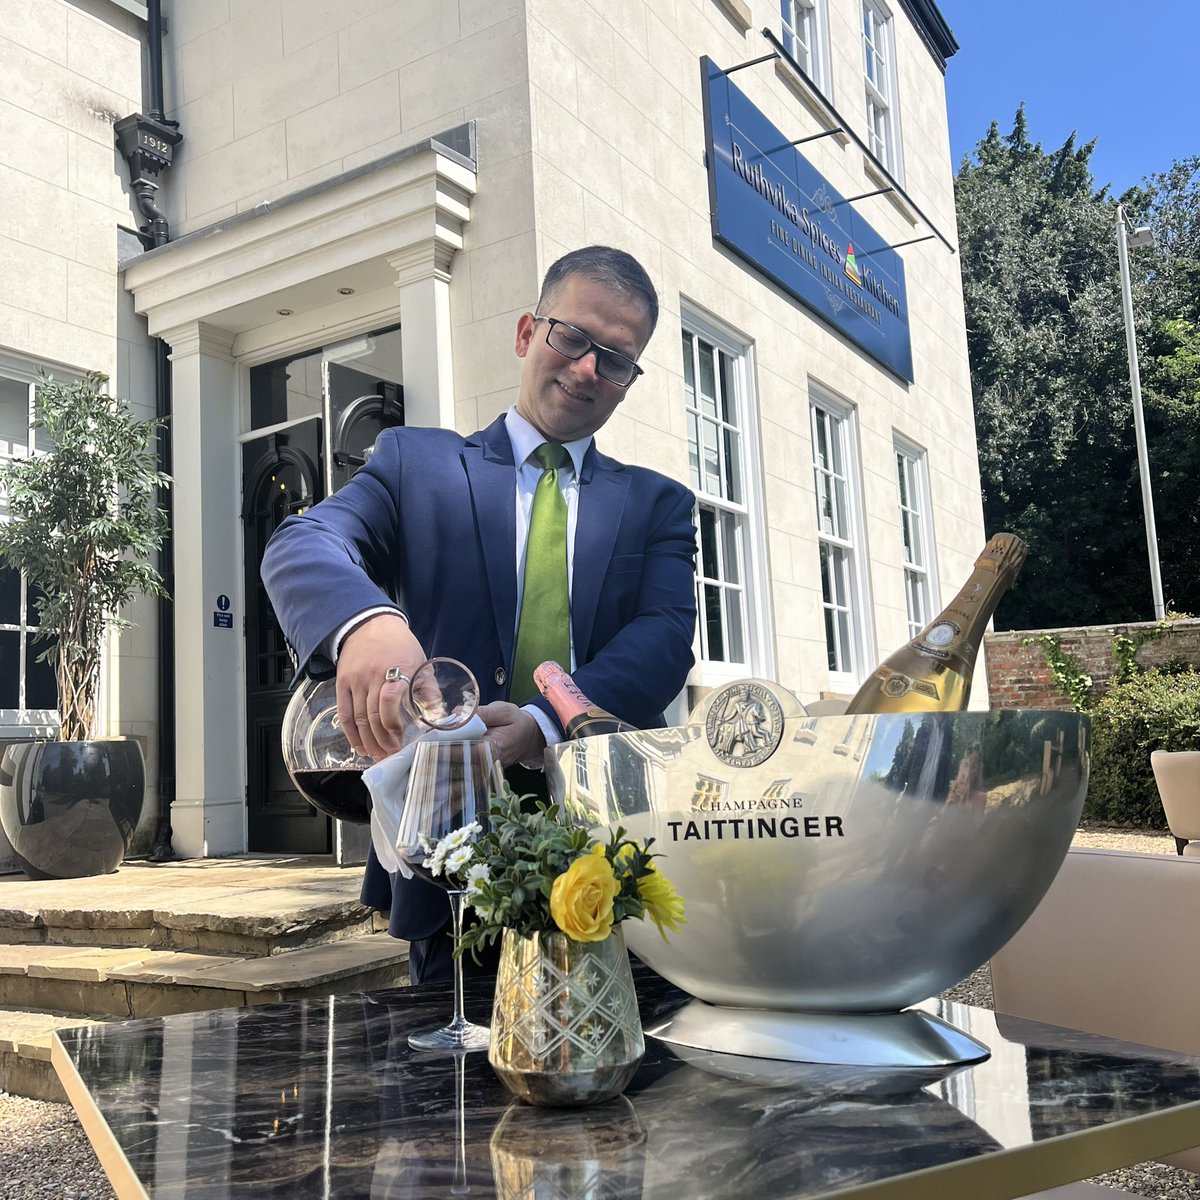 ☀️ The sun is shining (for now!) and the champagne is chilled… 🍾

Make the most of sunny days and enjoy an afternoon delight, anytime of the week! 

Monday is the new weekend! Cheers! 🥂 

#spring #finedining #indian #eastyorkshire #alfresco #noordinaryindian